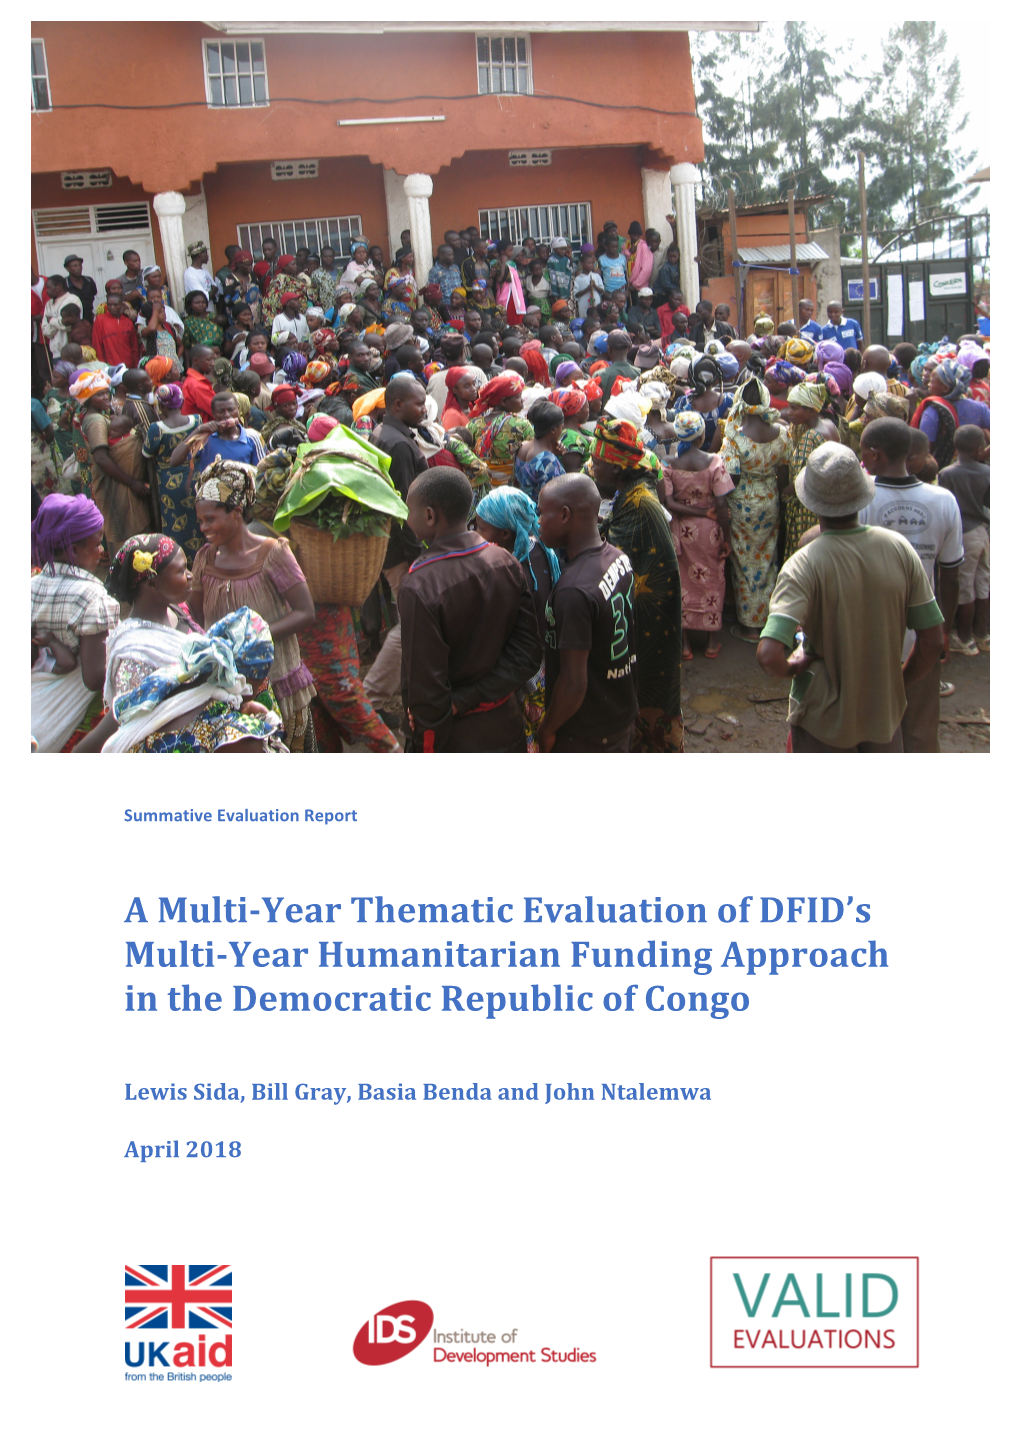 A Multi-Year Thematic Evaluation of DFID's Multi-Year Humanitarian